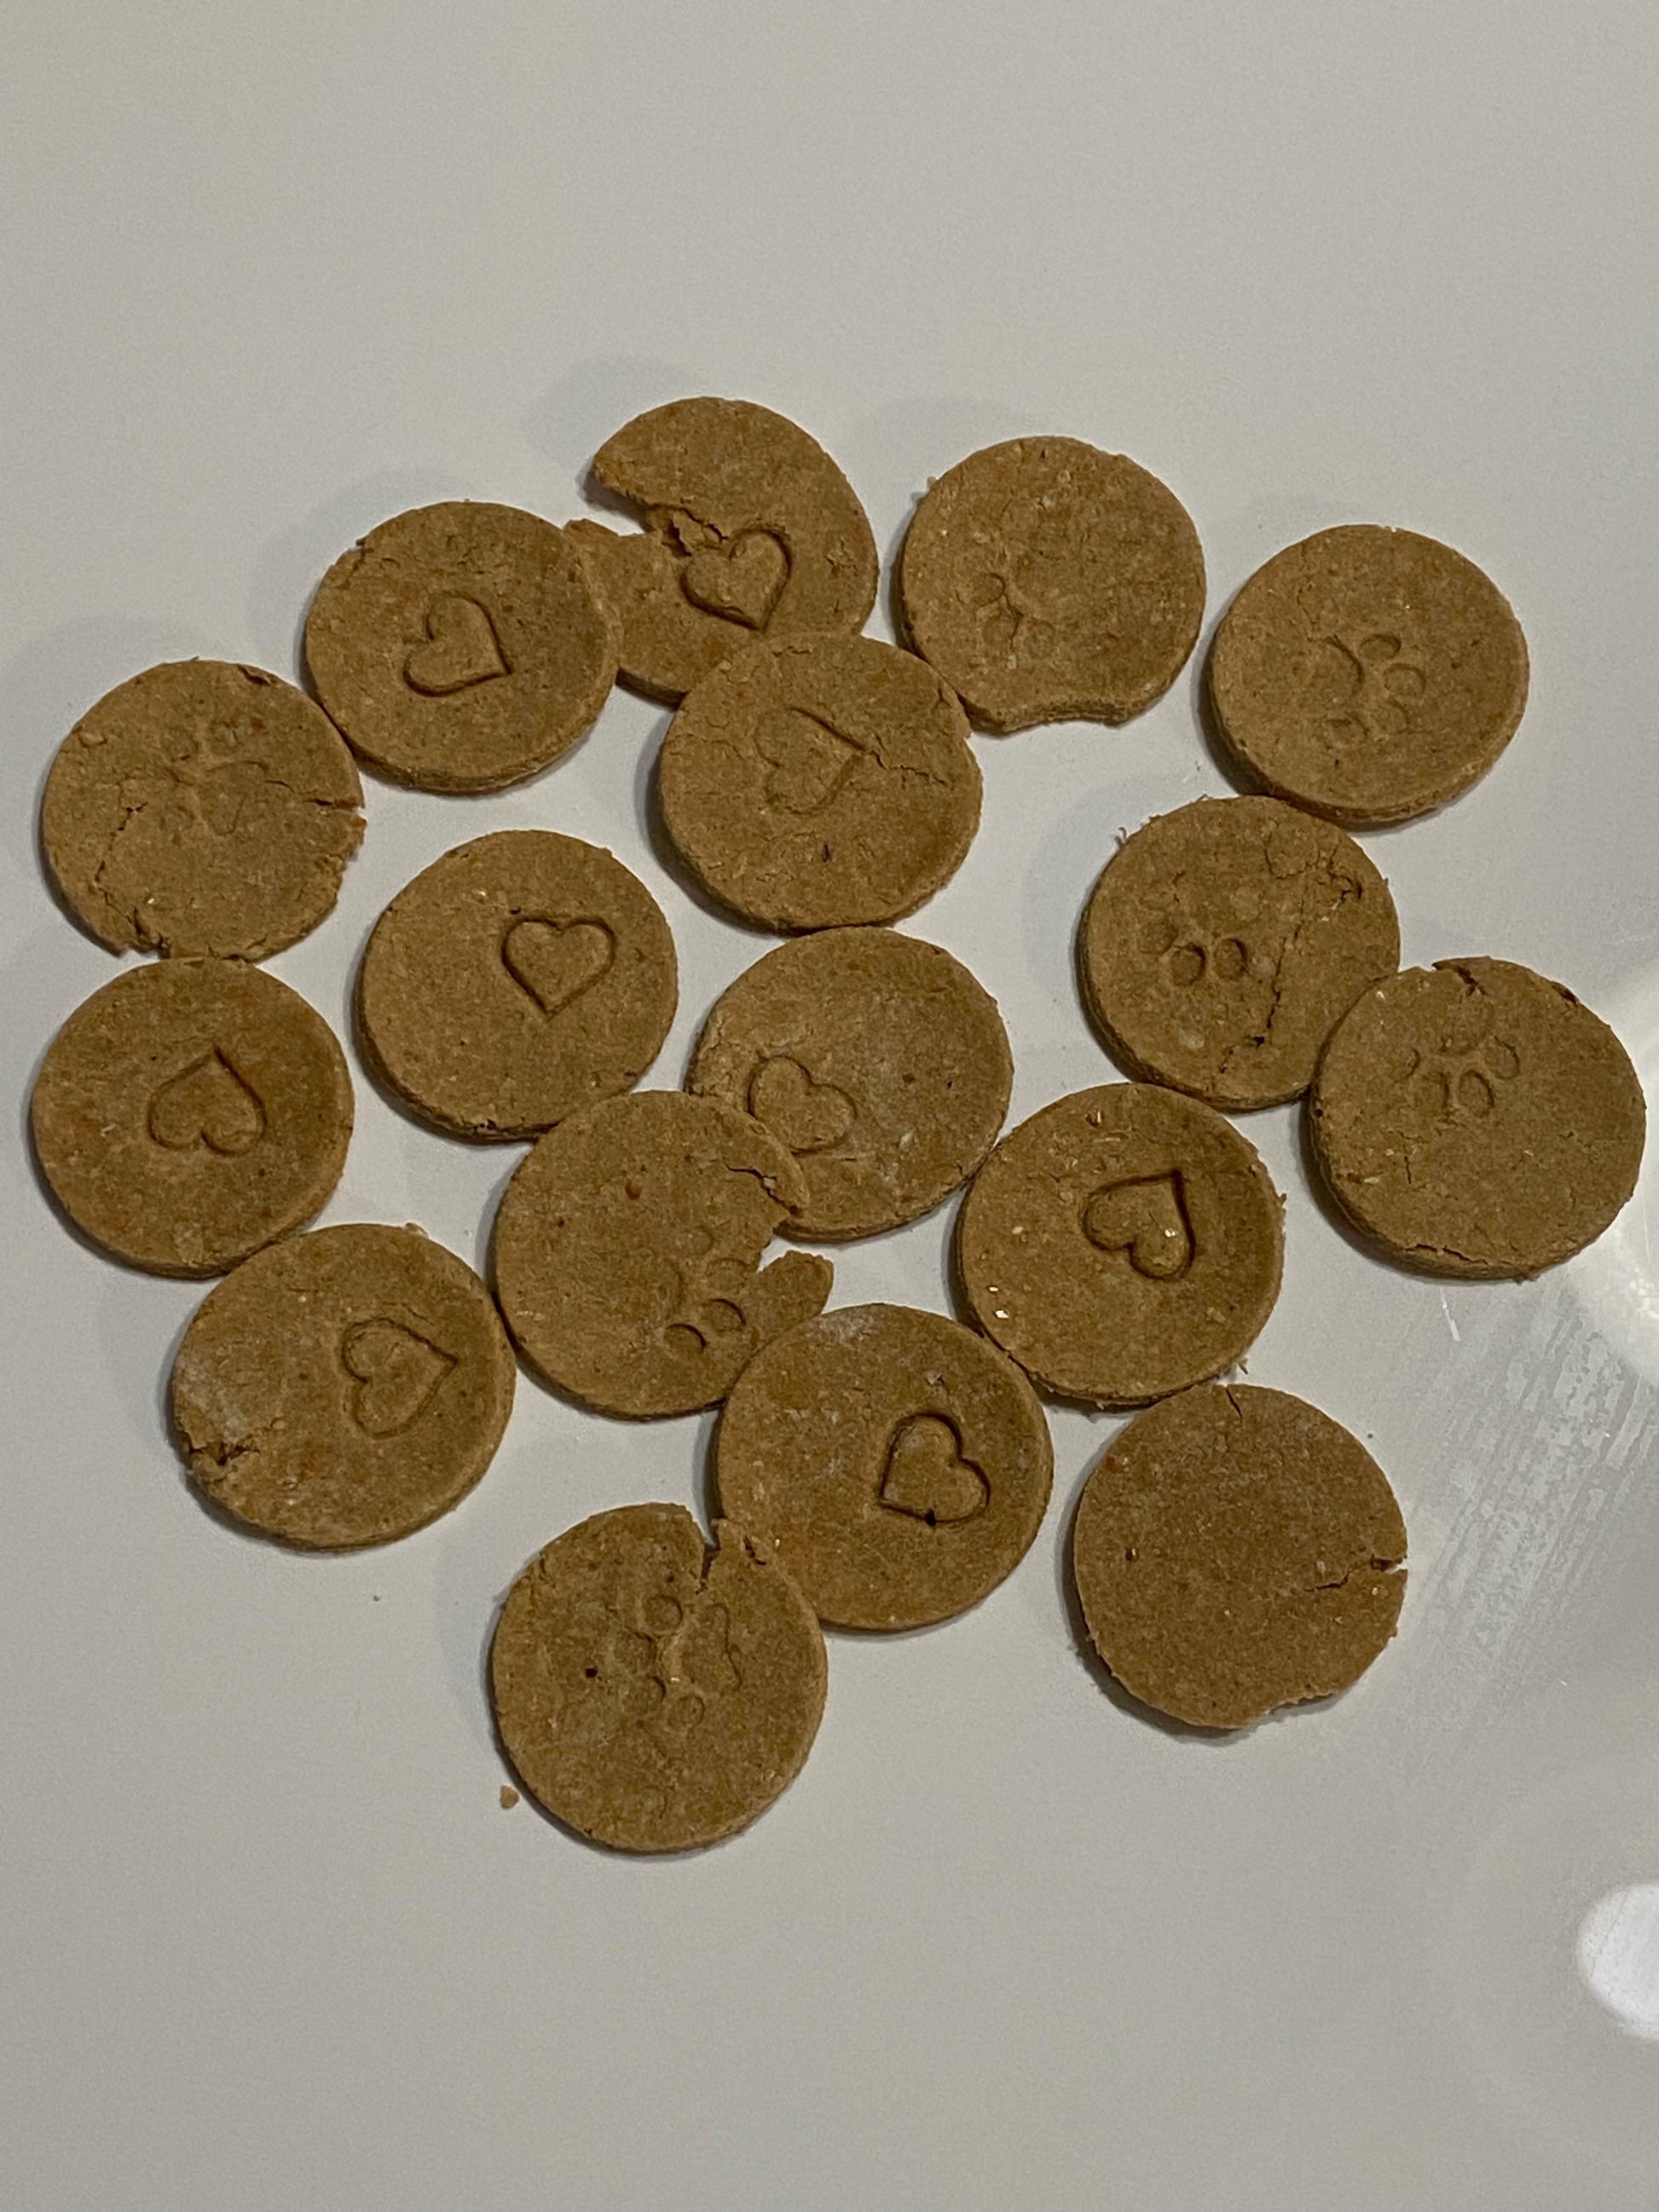 1.5 inch round dog treats, color brown stamped with hearts and paw prints